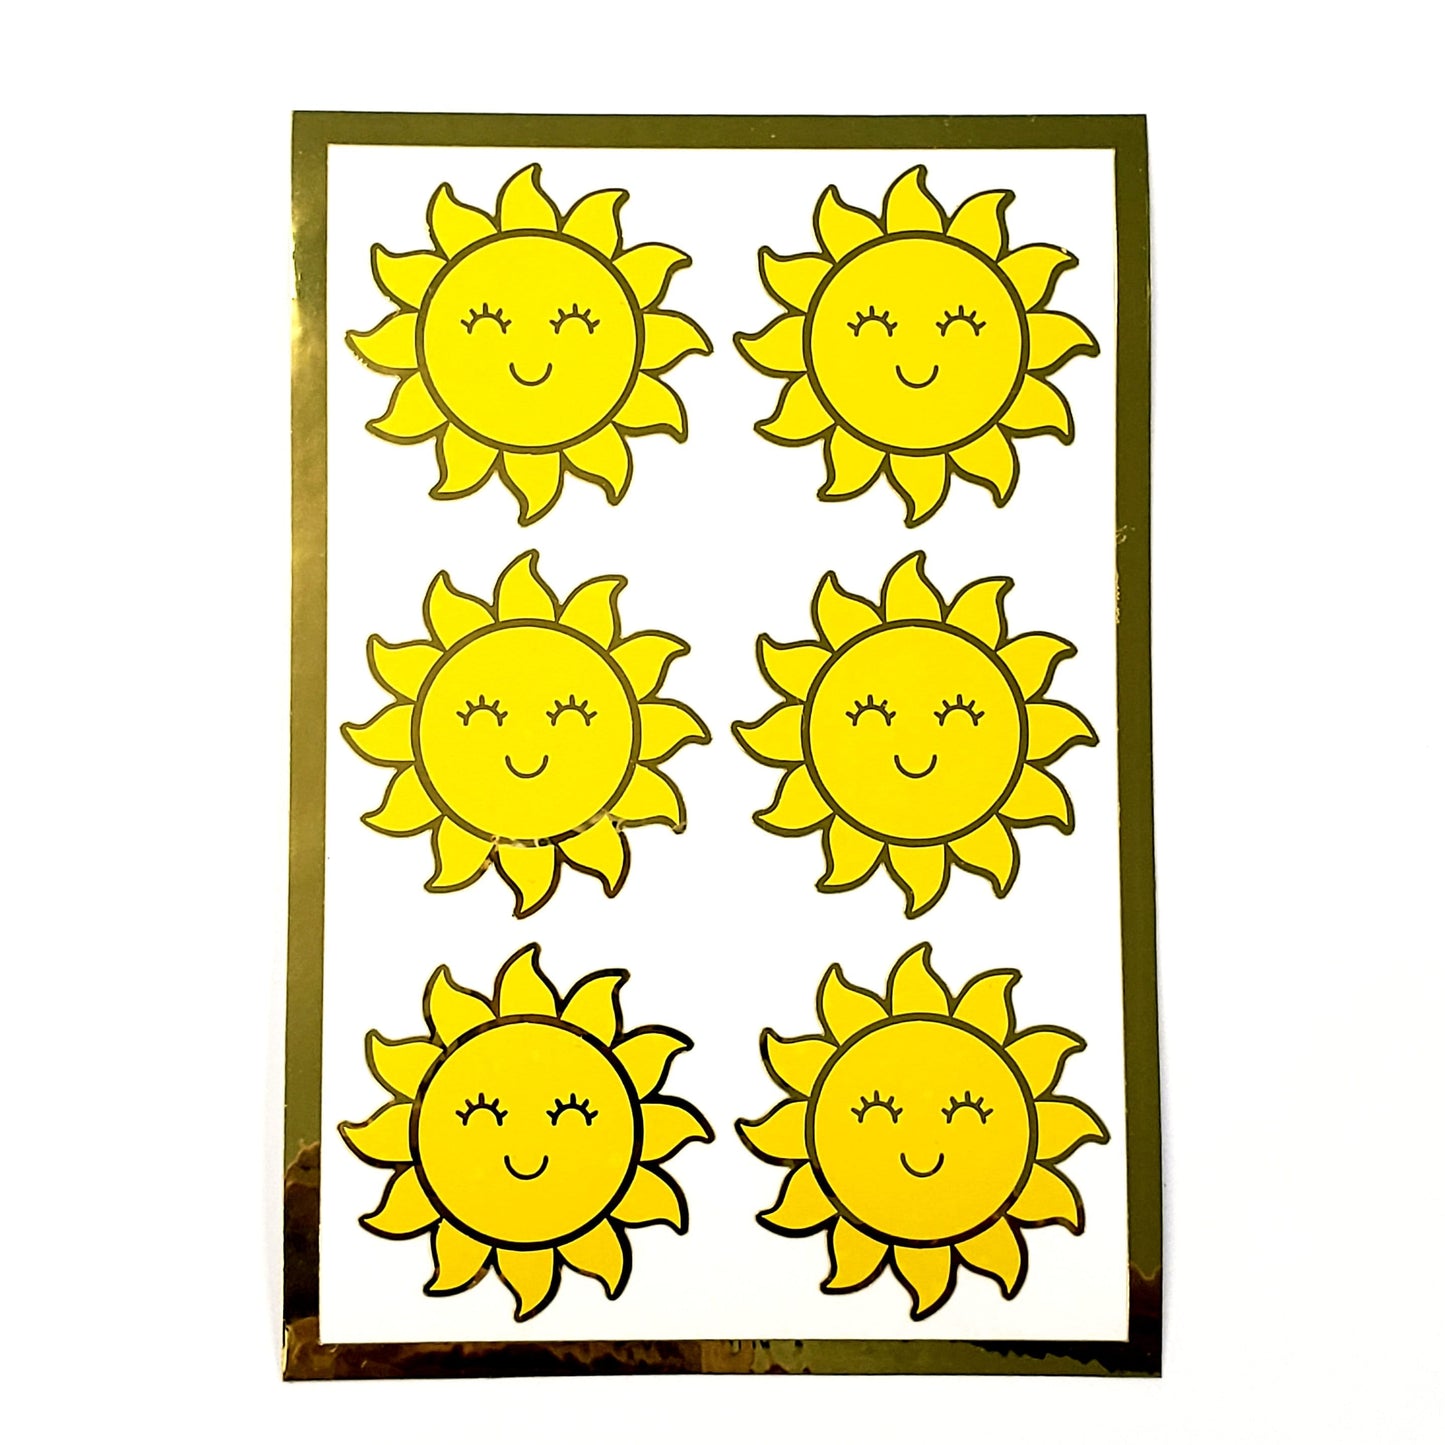 Happy Sun Stickers, set of 6 shiny yellow and gold smiling sun vinyl stickers for daily journals, cards, notebooks, envelopes and laptops.